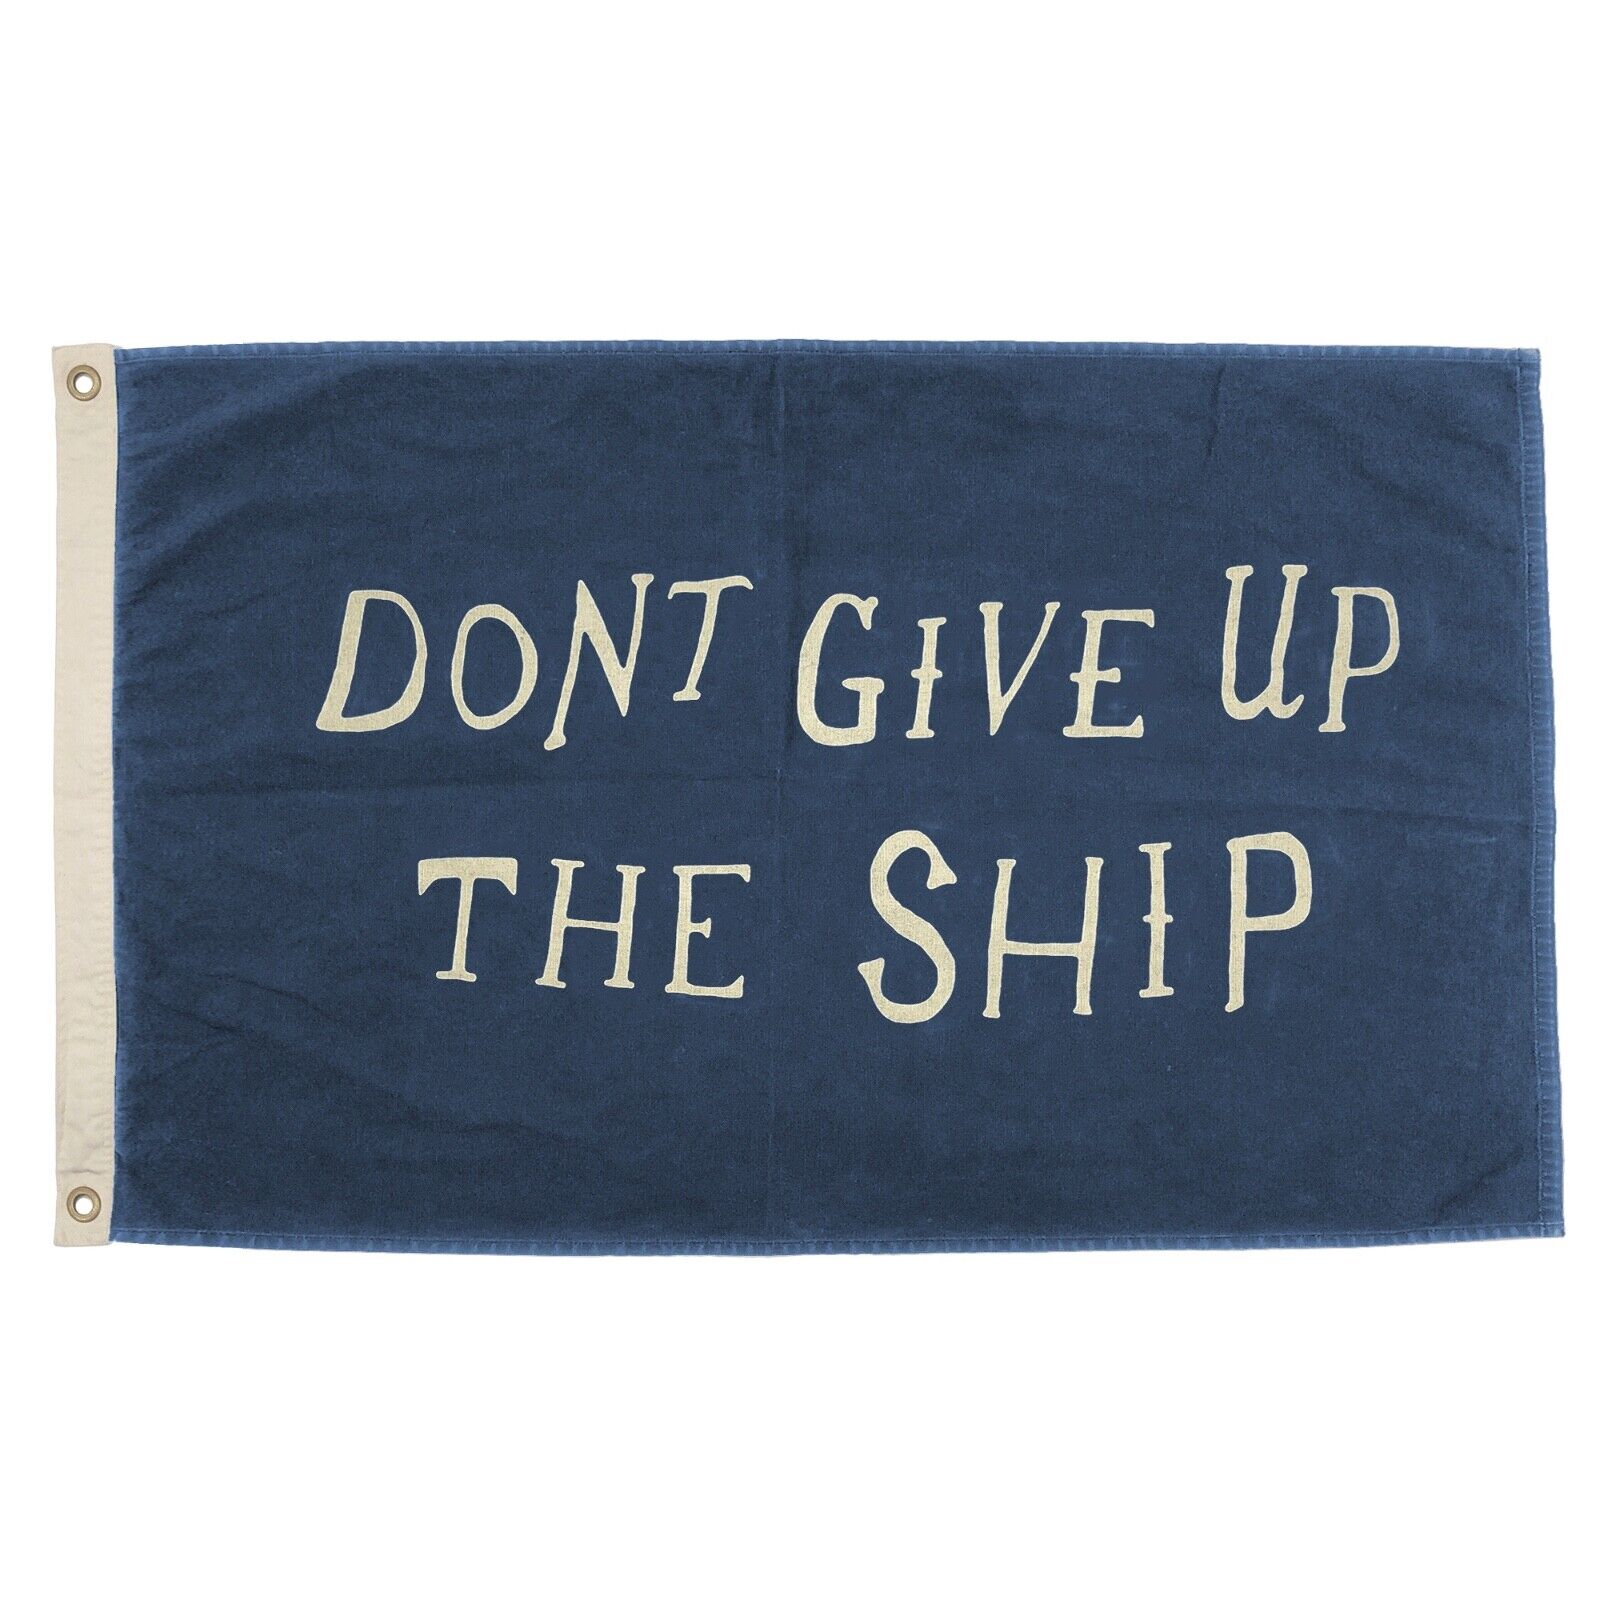 Stone Washed 100% Cotton Flag Don't Give Up the Ship American Nautical Distress